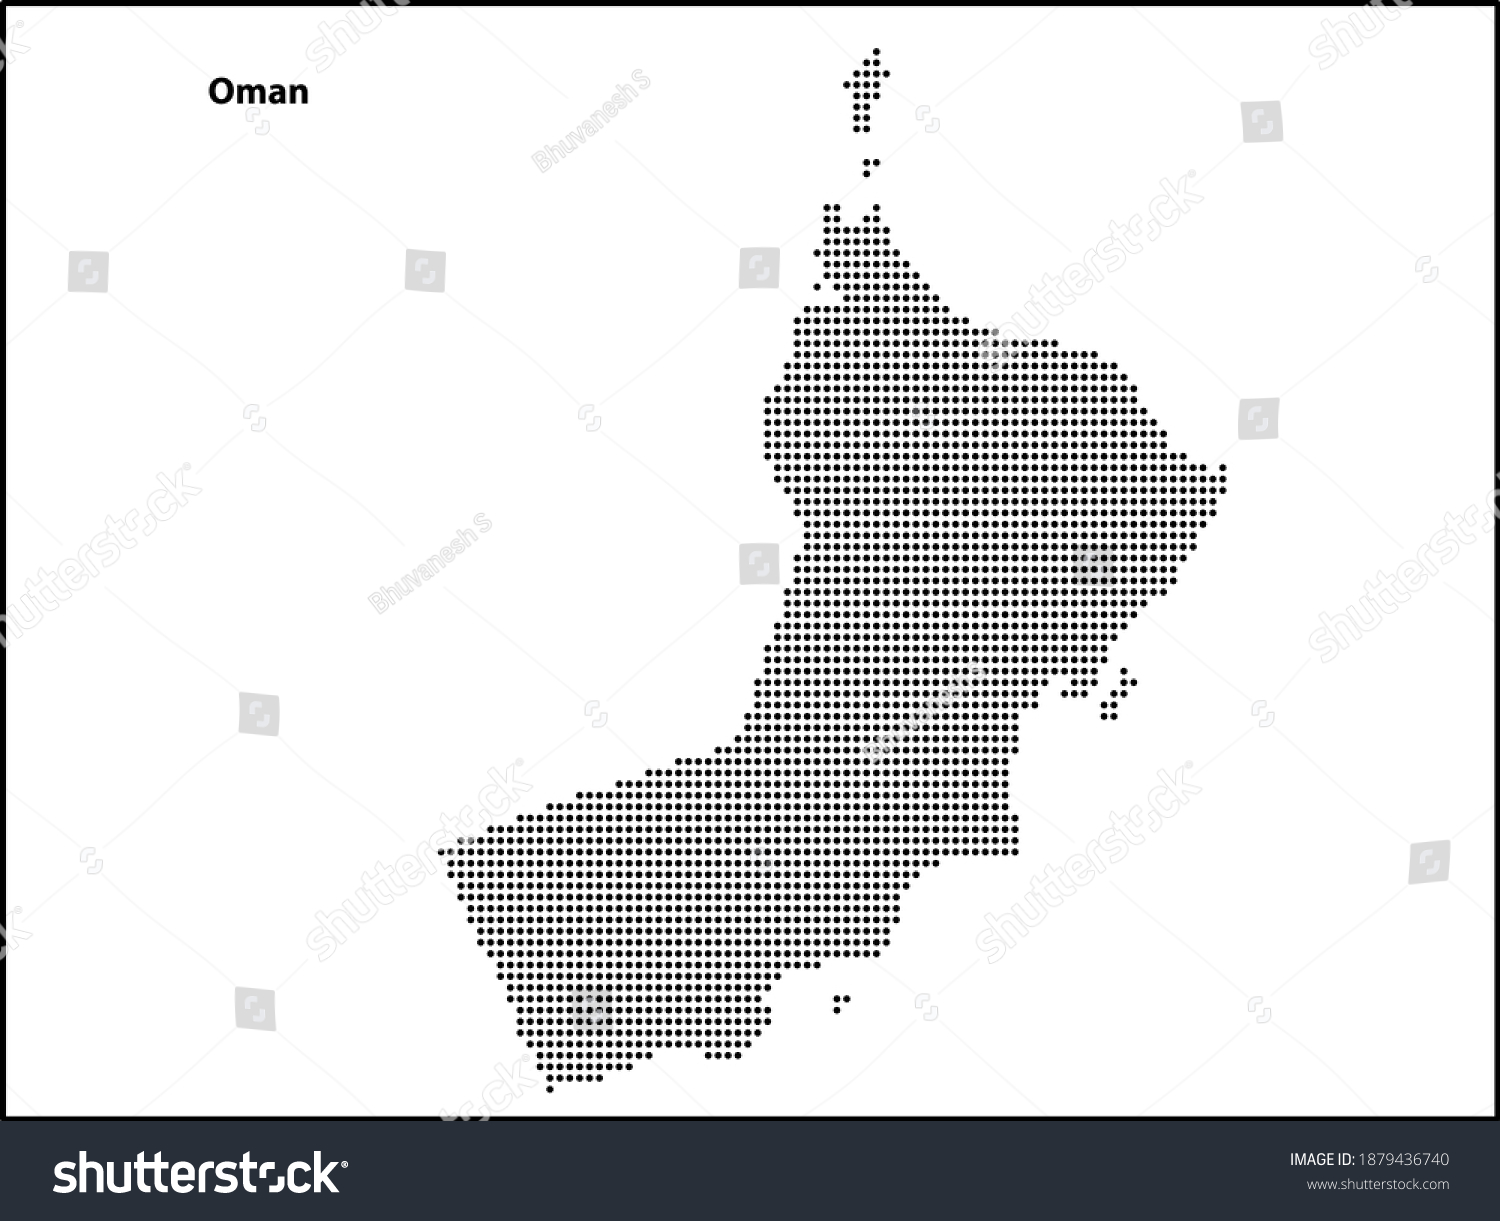 Vector Halftone Dotted Map Of Oman Country For Royalty Free Stock Vector 1879436740 